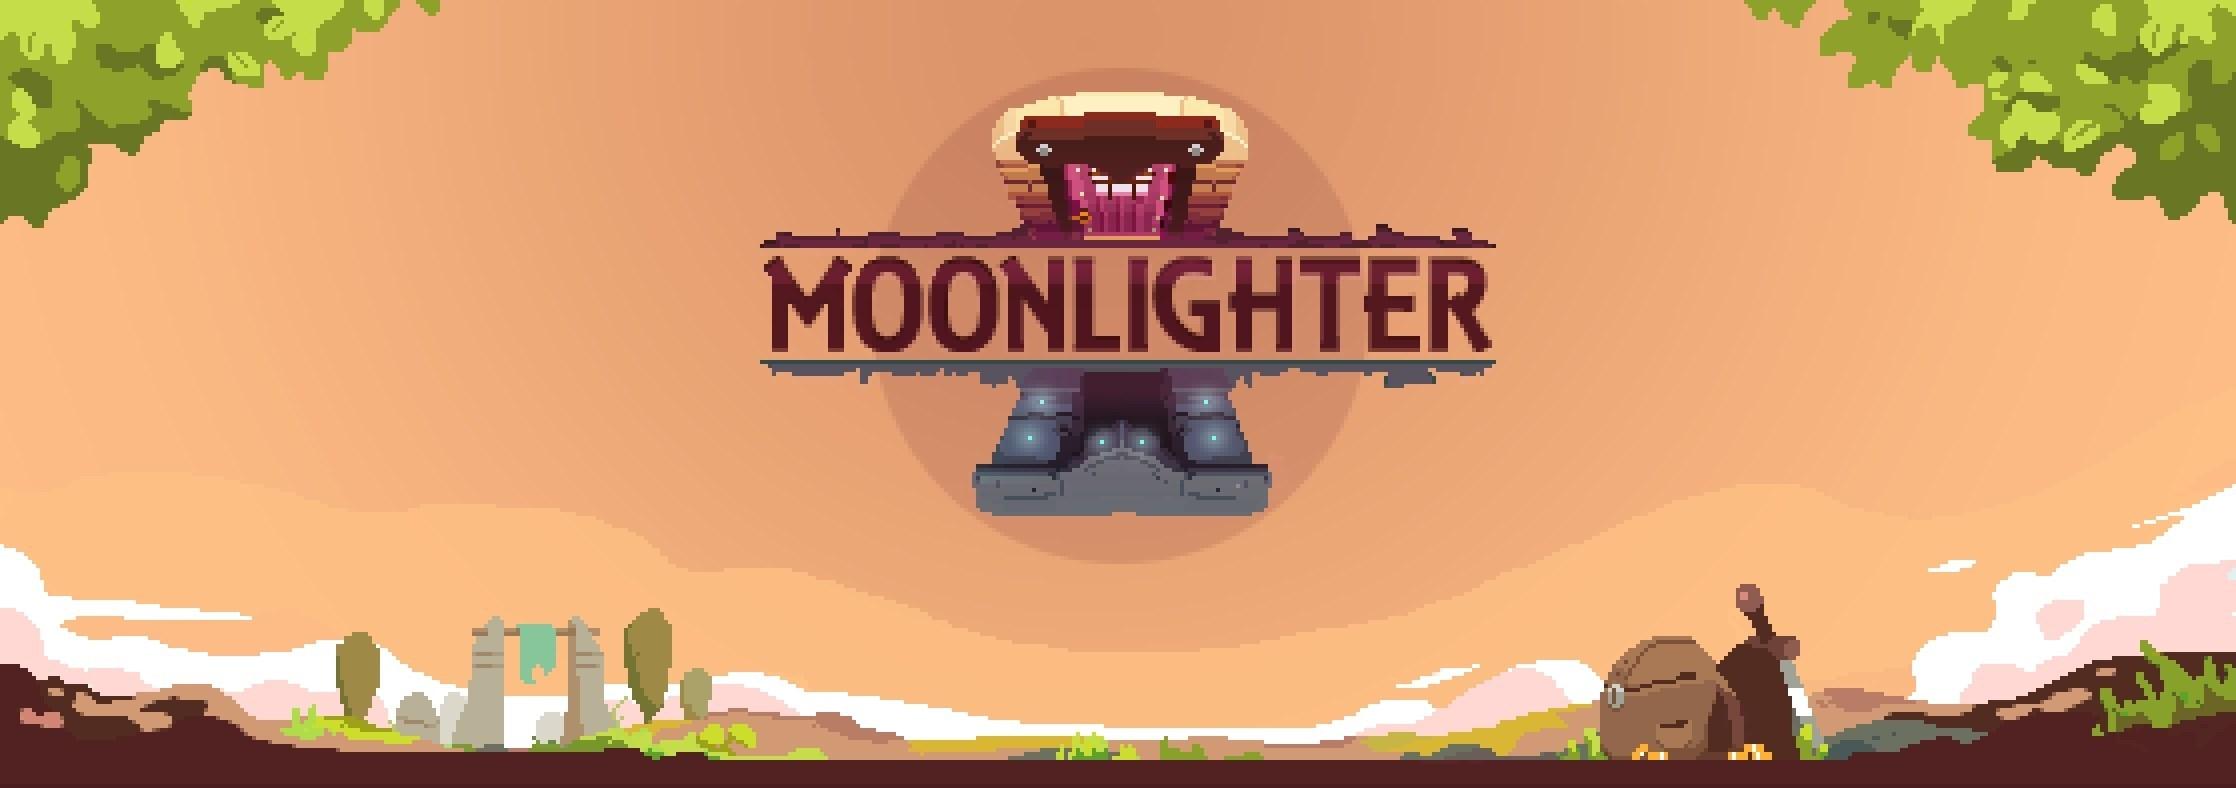 download the last version for windows Moonlighter